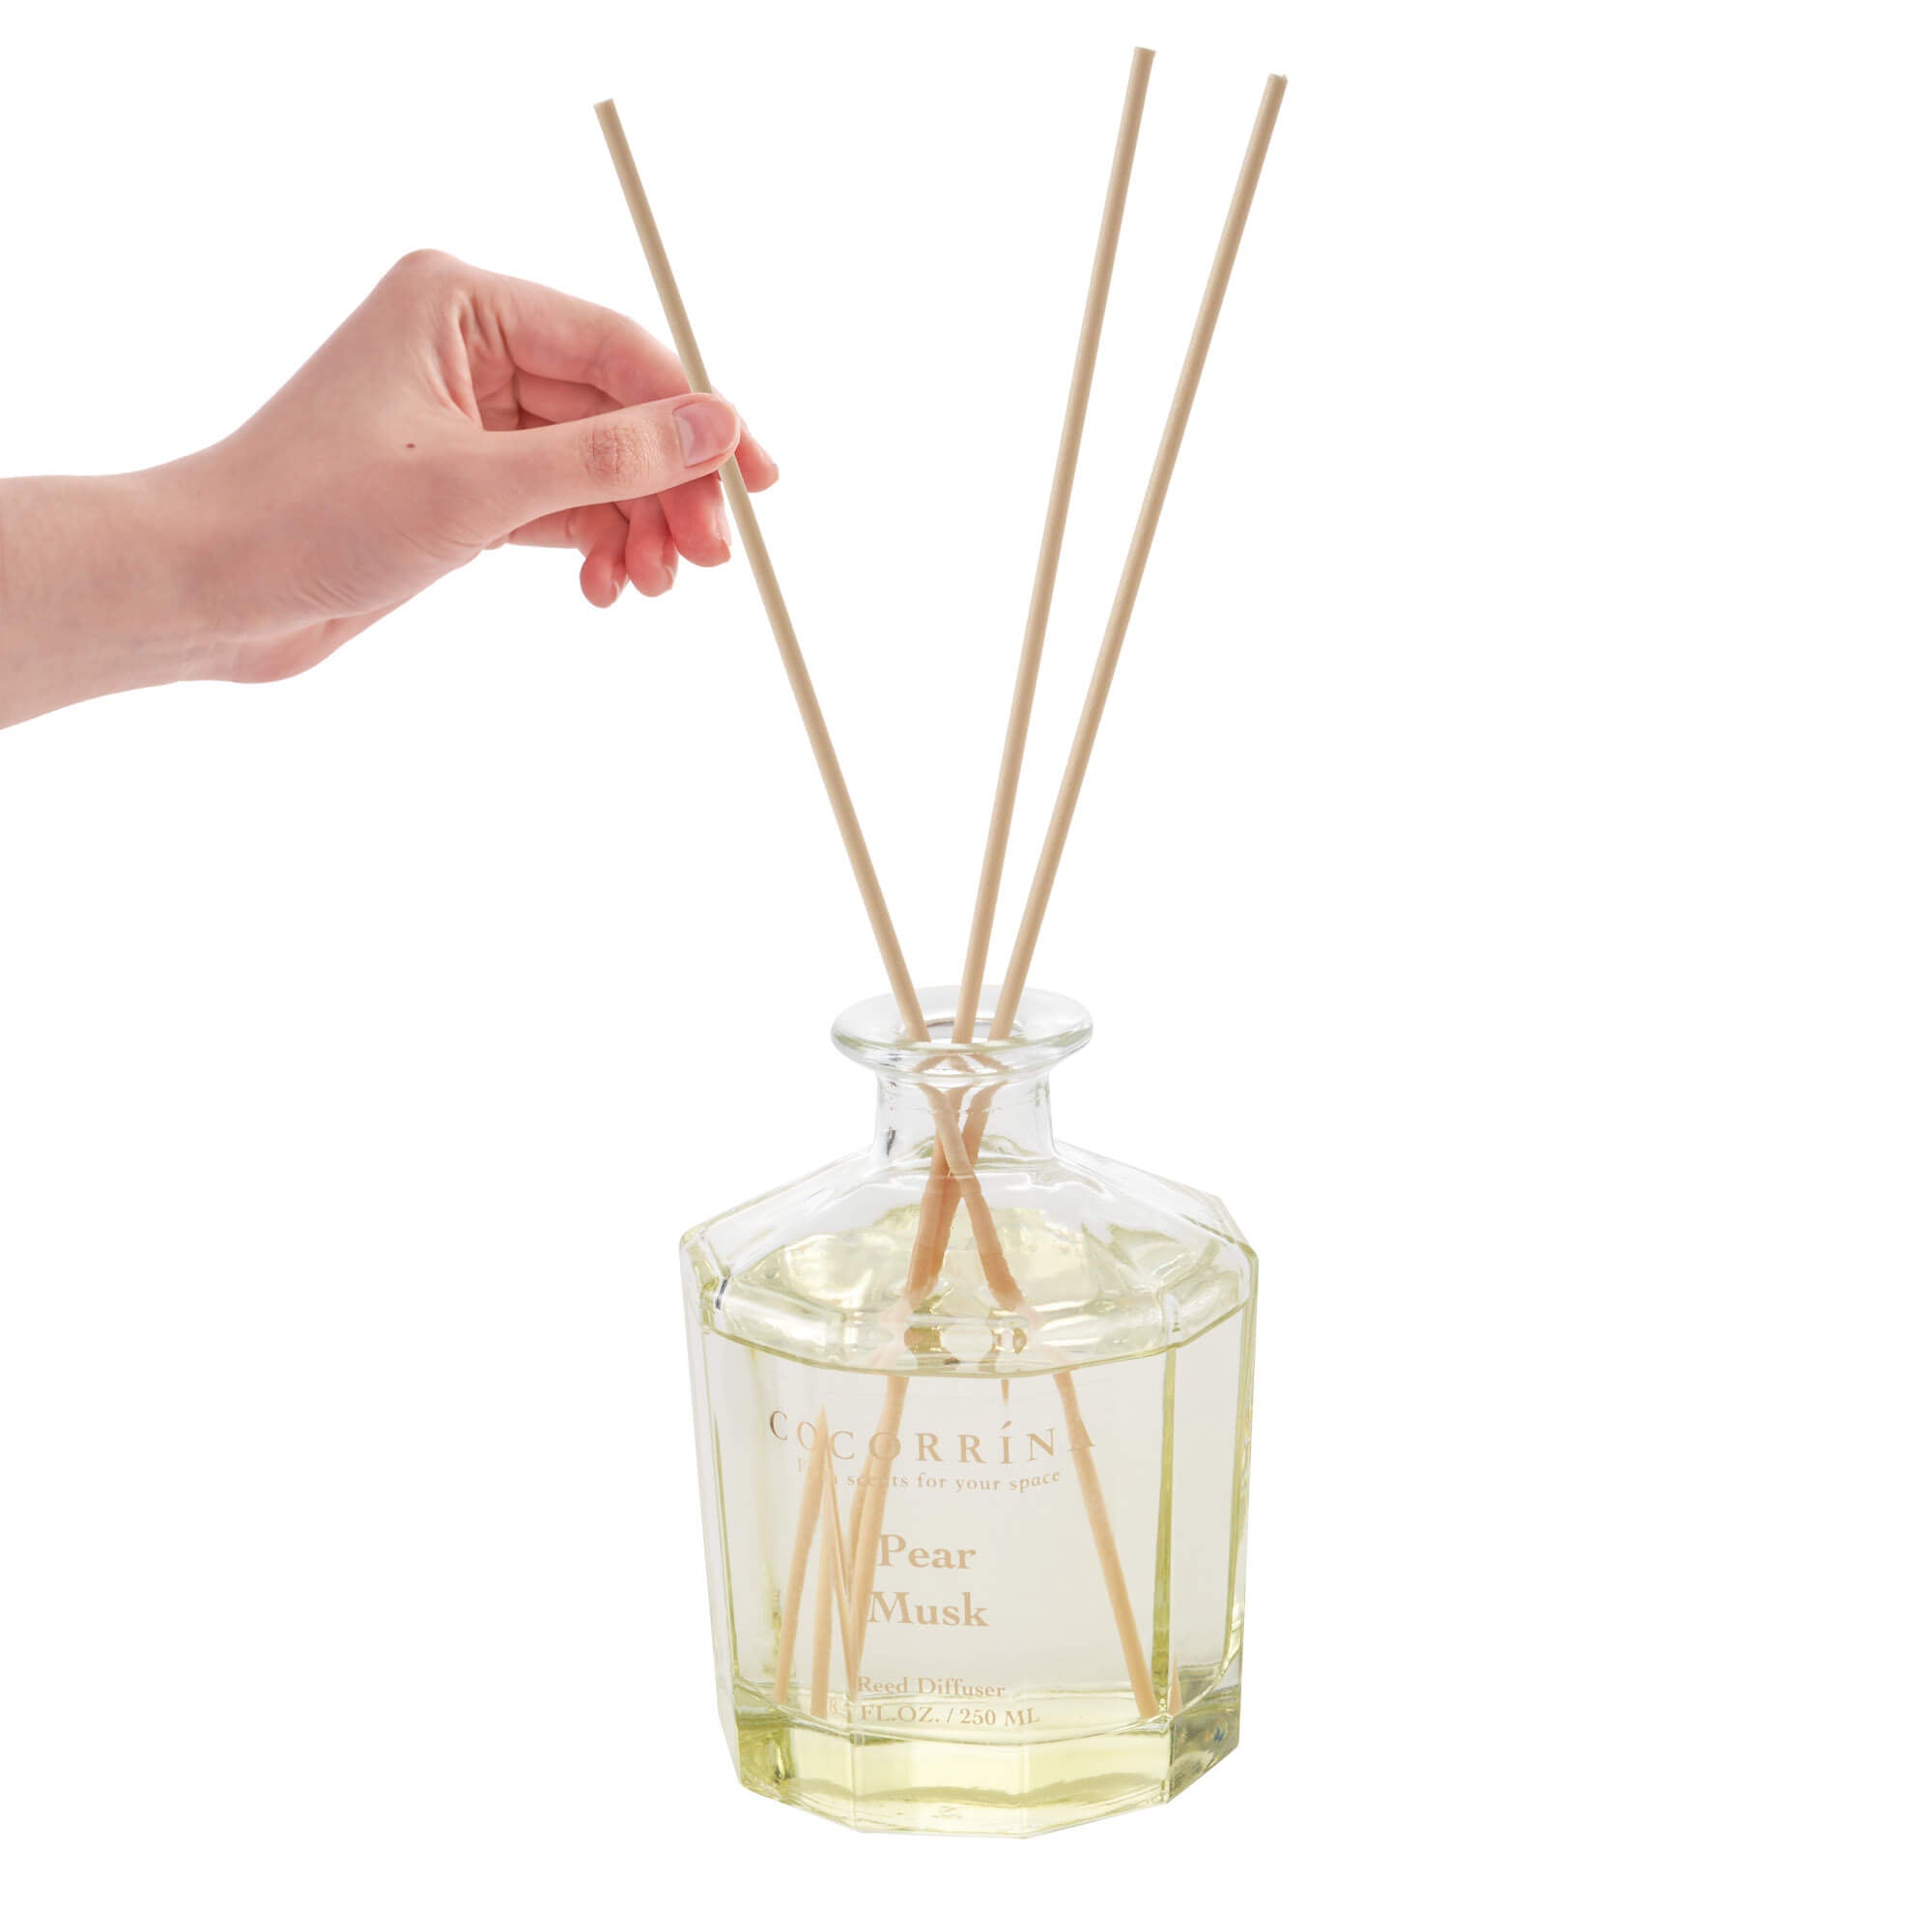 COCORRÍNA Pear Musk Reed Diffuser Set